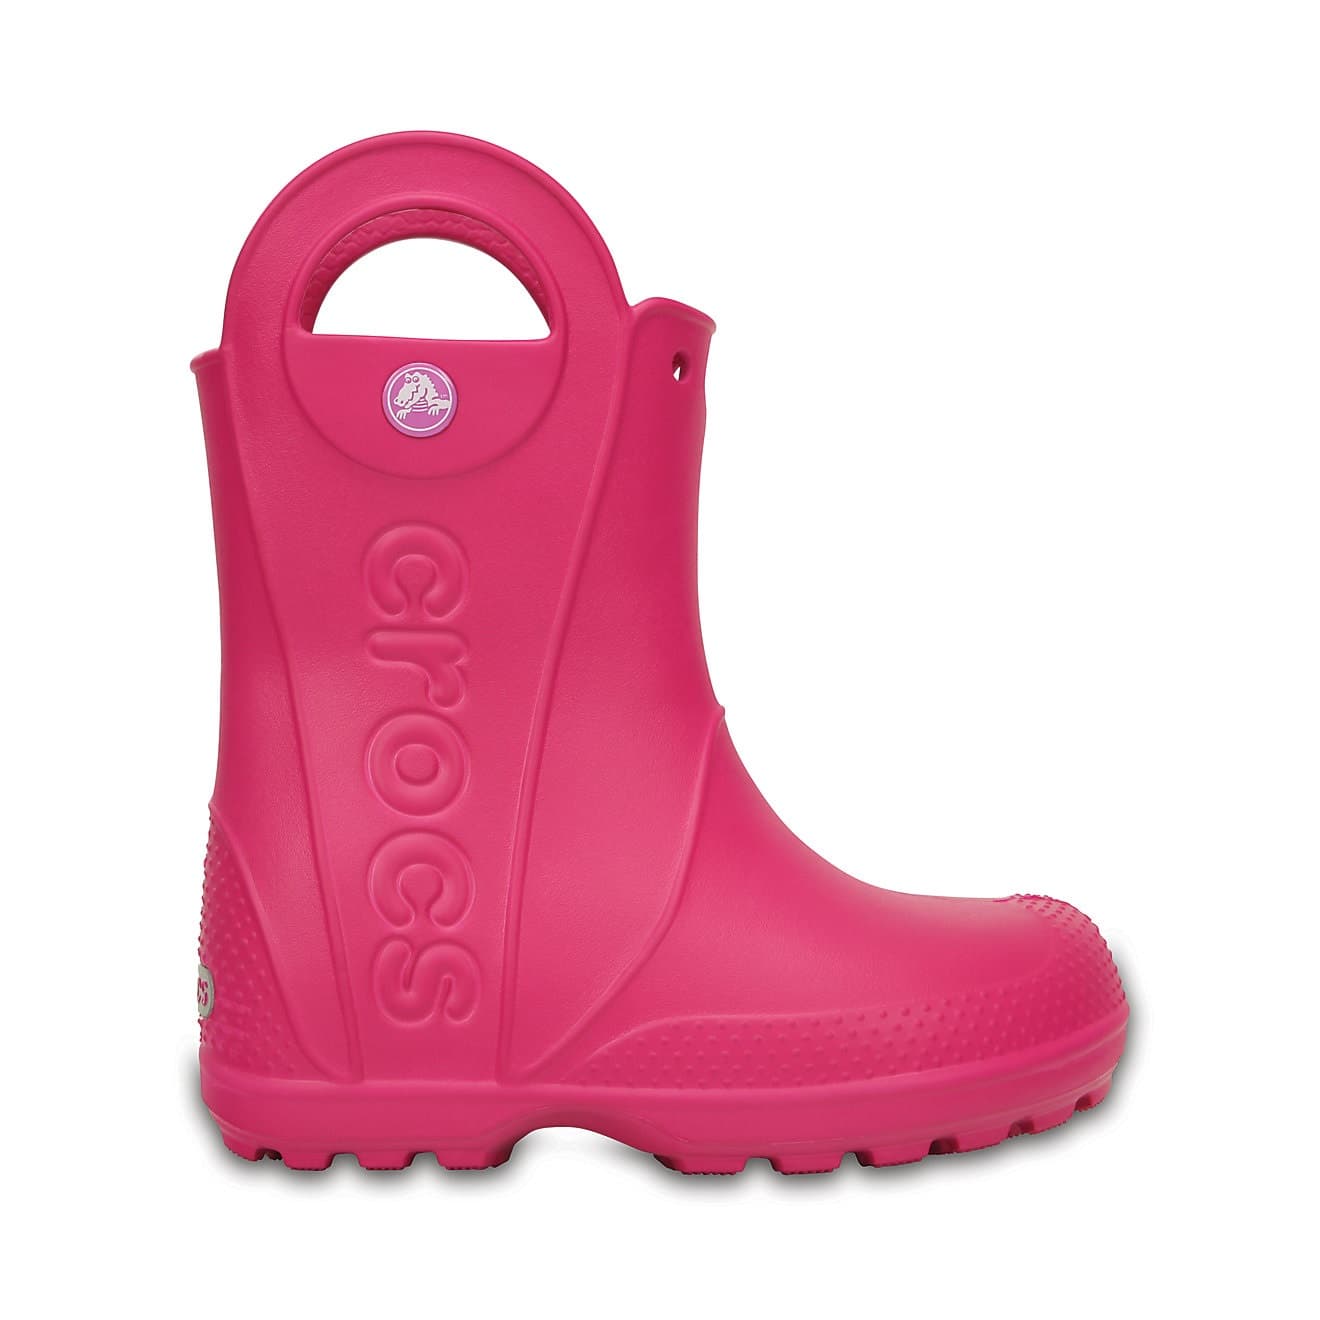 Buy Crocs Handle It Rain Boot from Outnorth